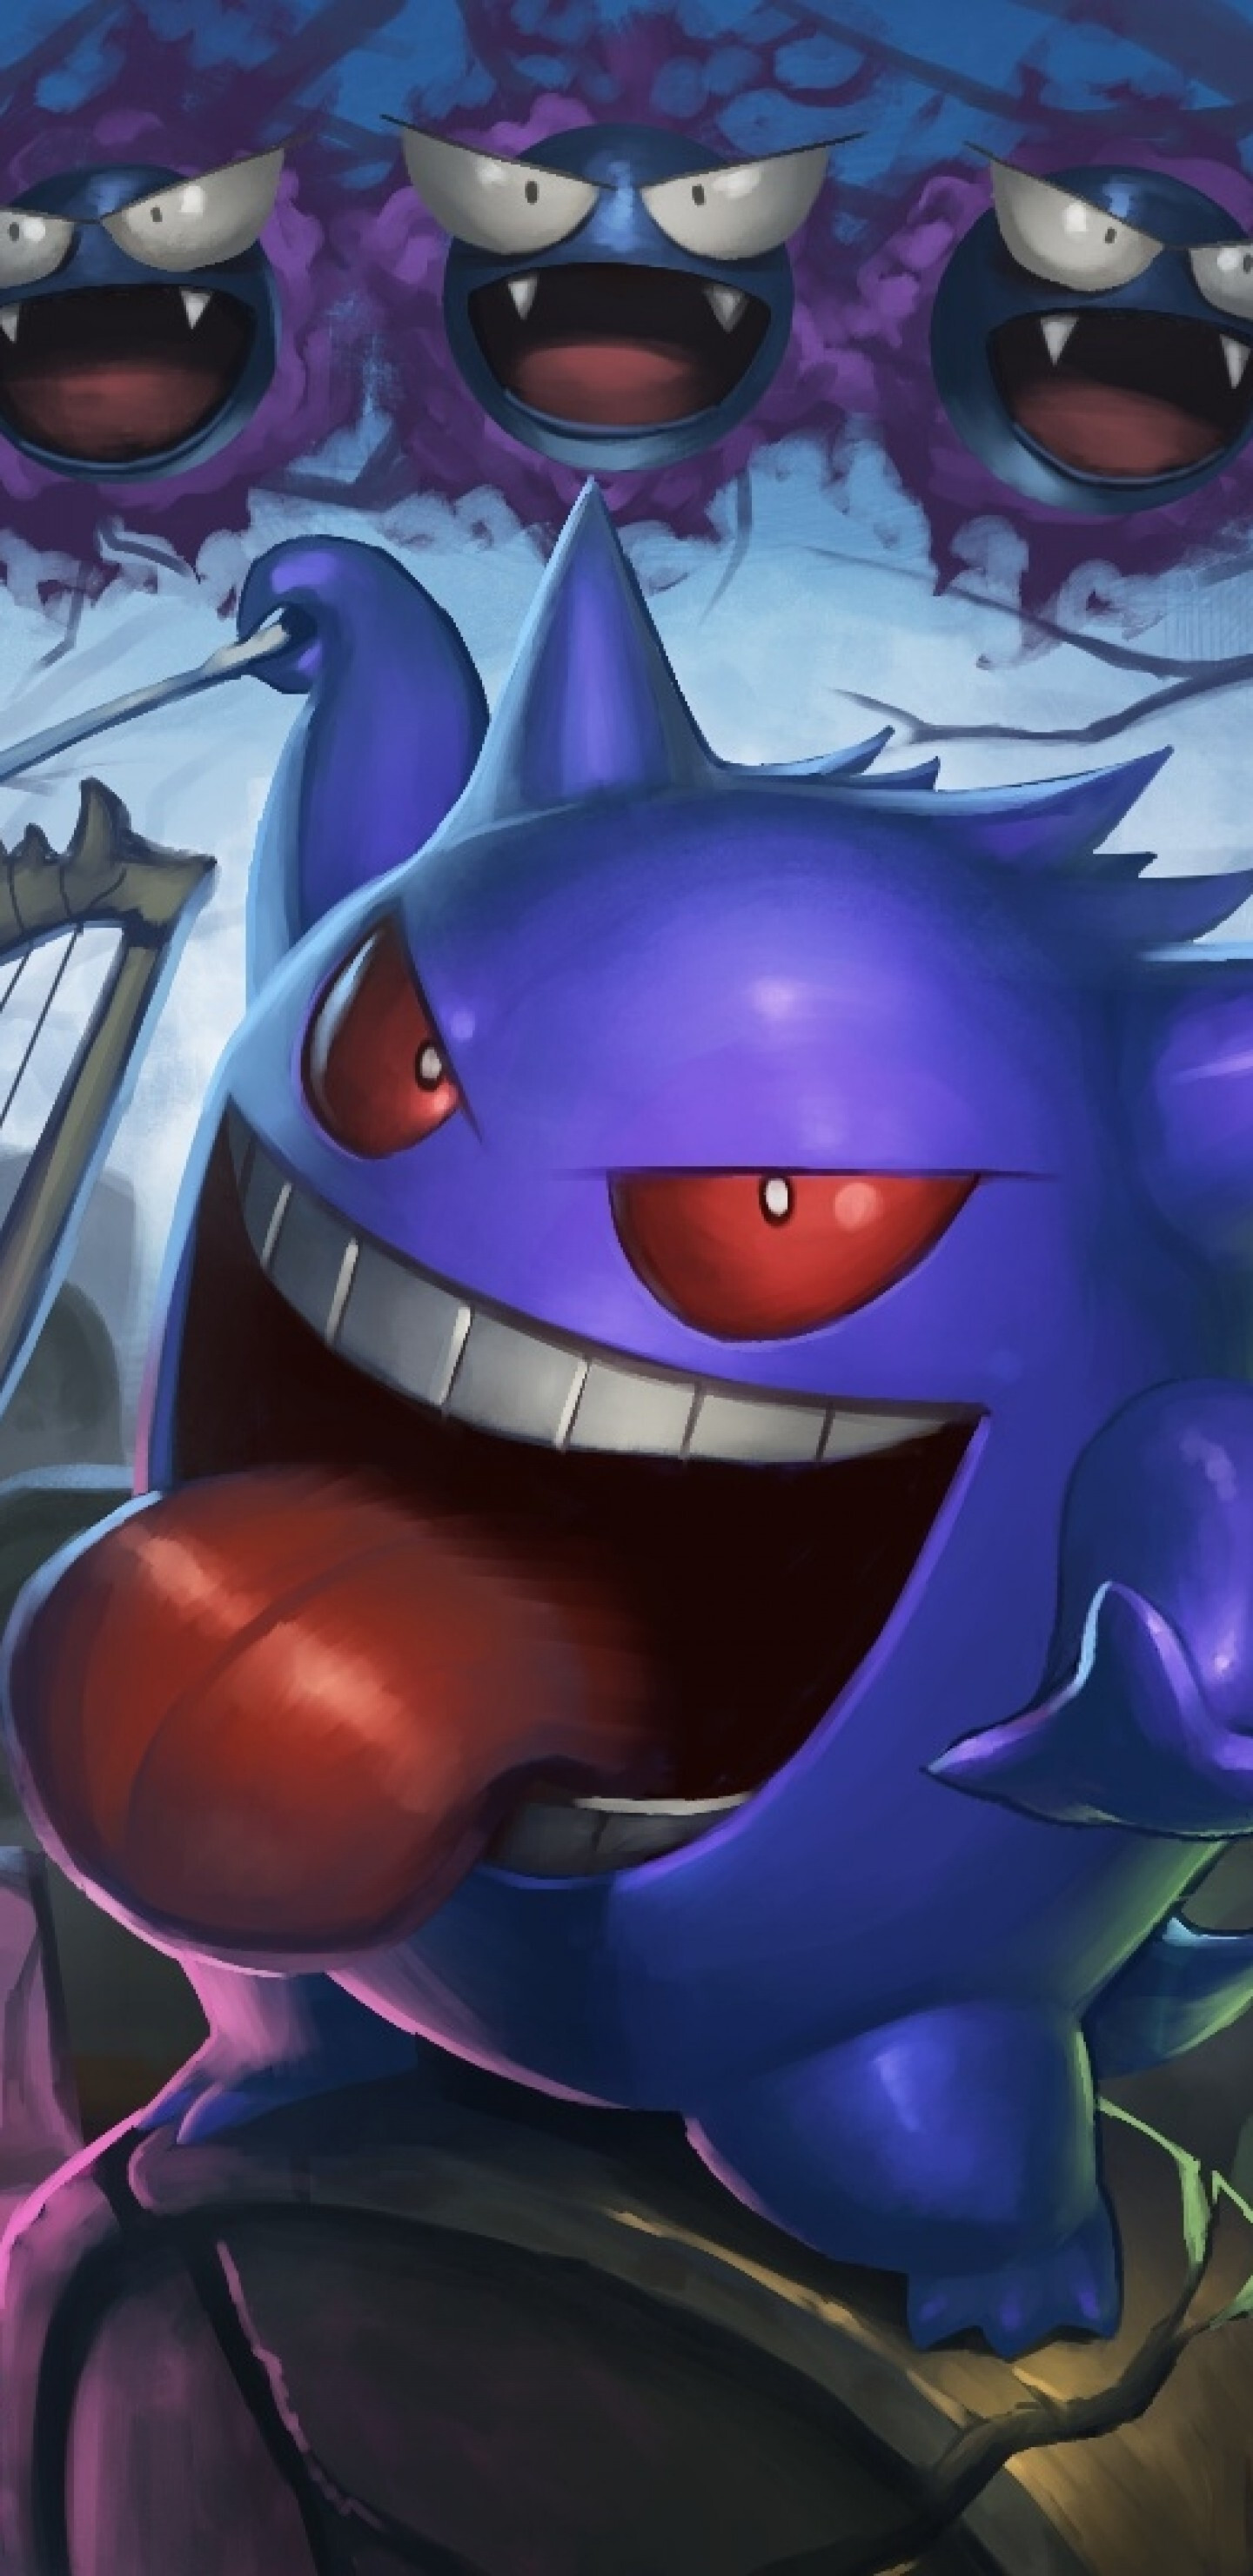 Gengar: Haunter, A purple, spiky, floating figure with triangular eyes, Sneaking up on their victims and licking them. 1440x2960 HD Background.